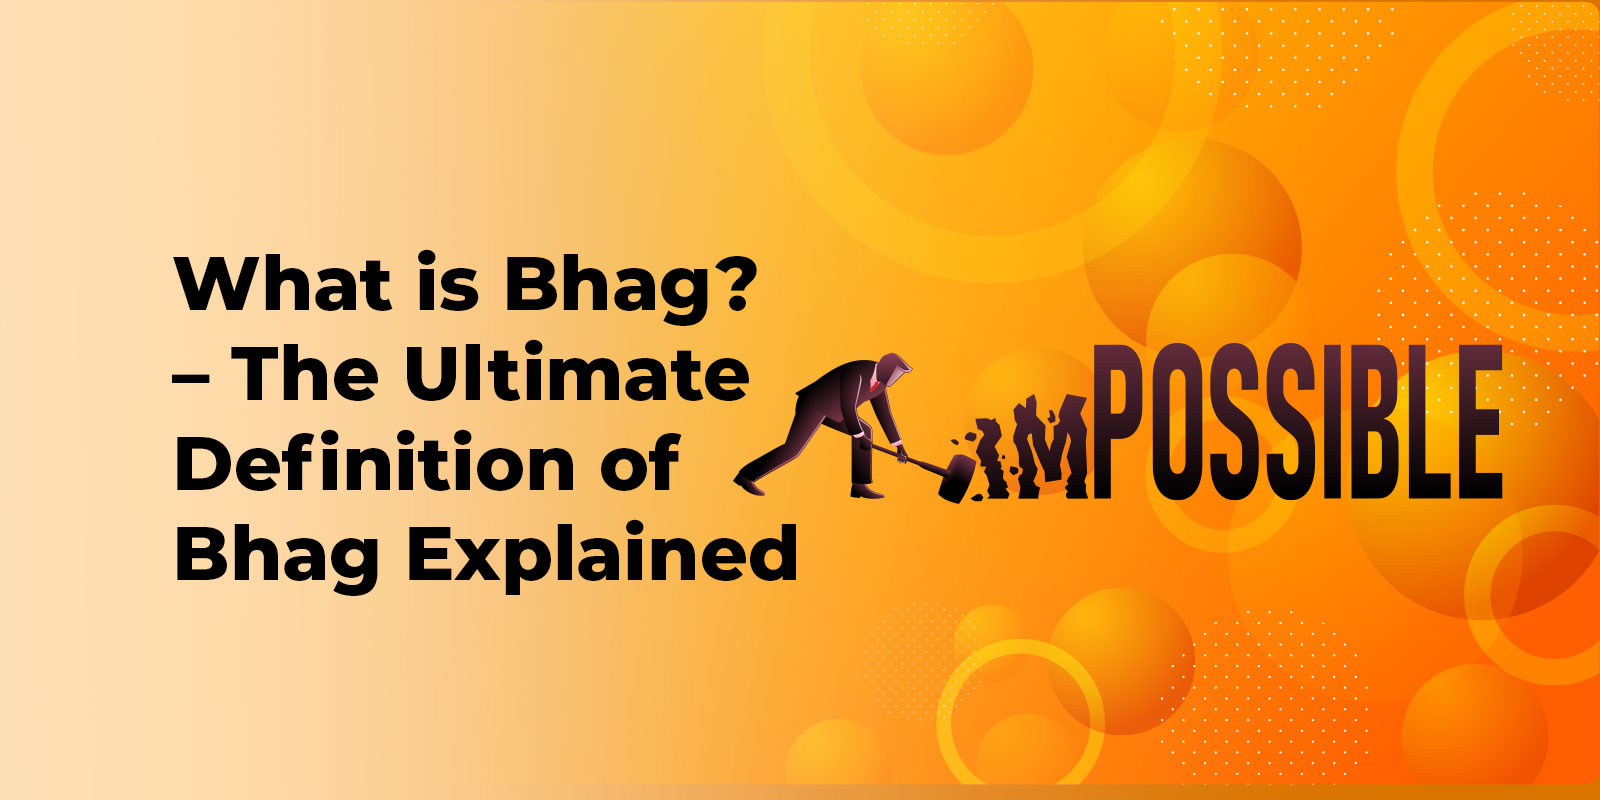 What is Bhag? – The Ultimate Definition of Bhag Explained